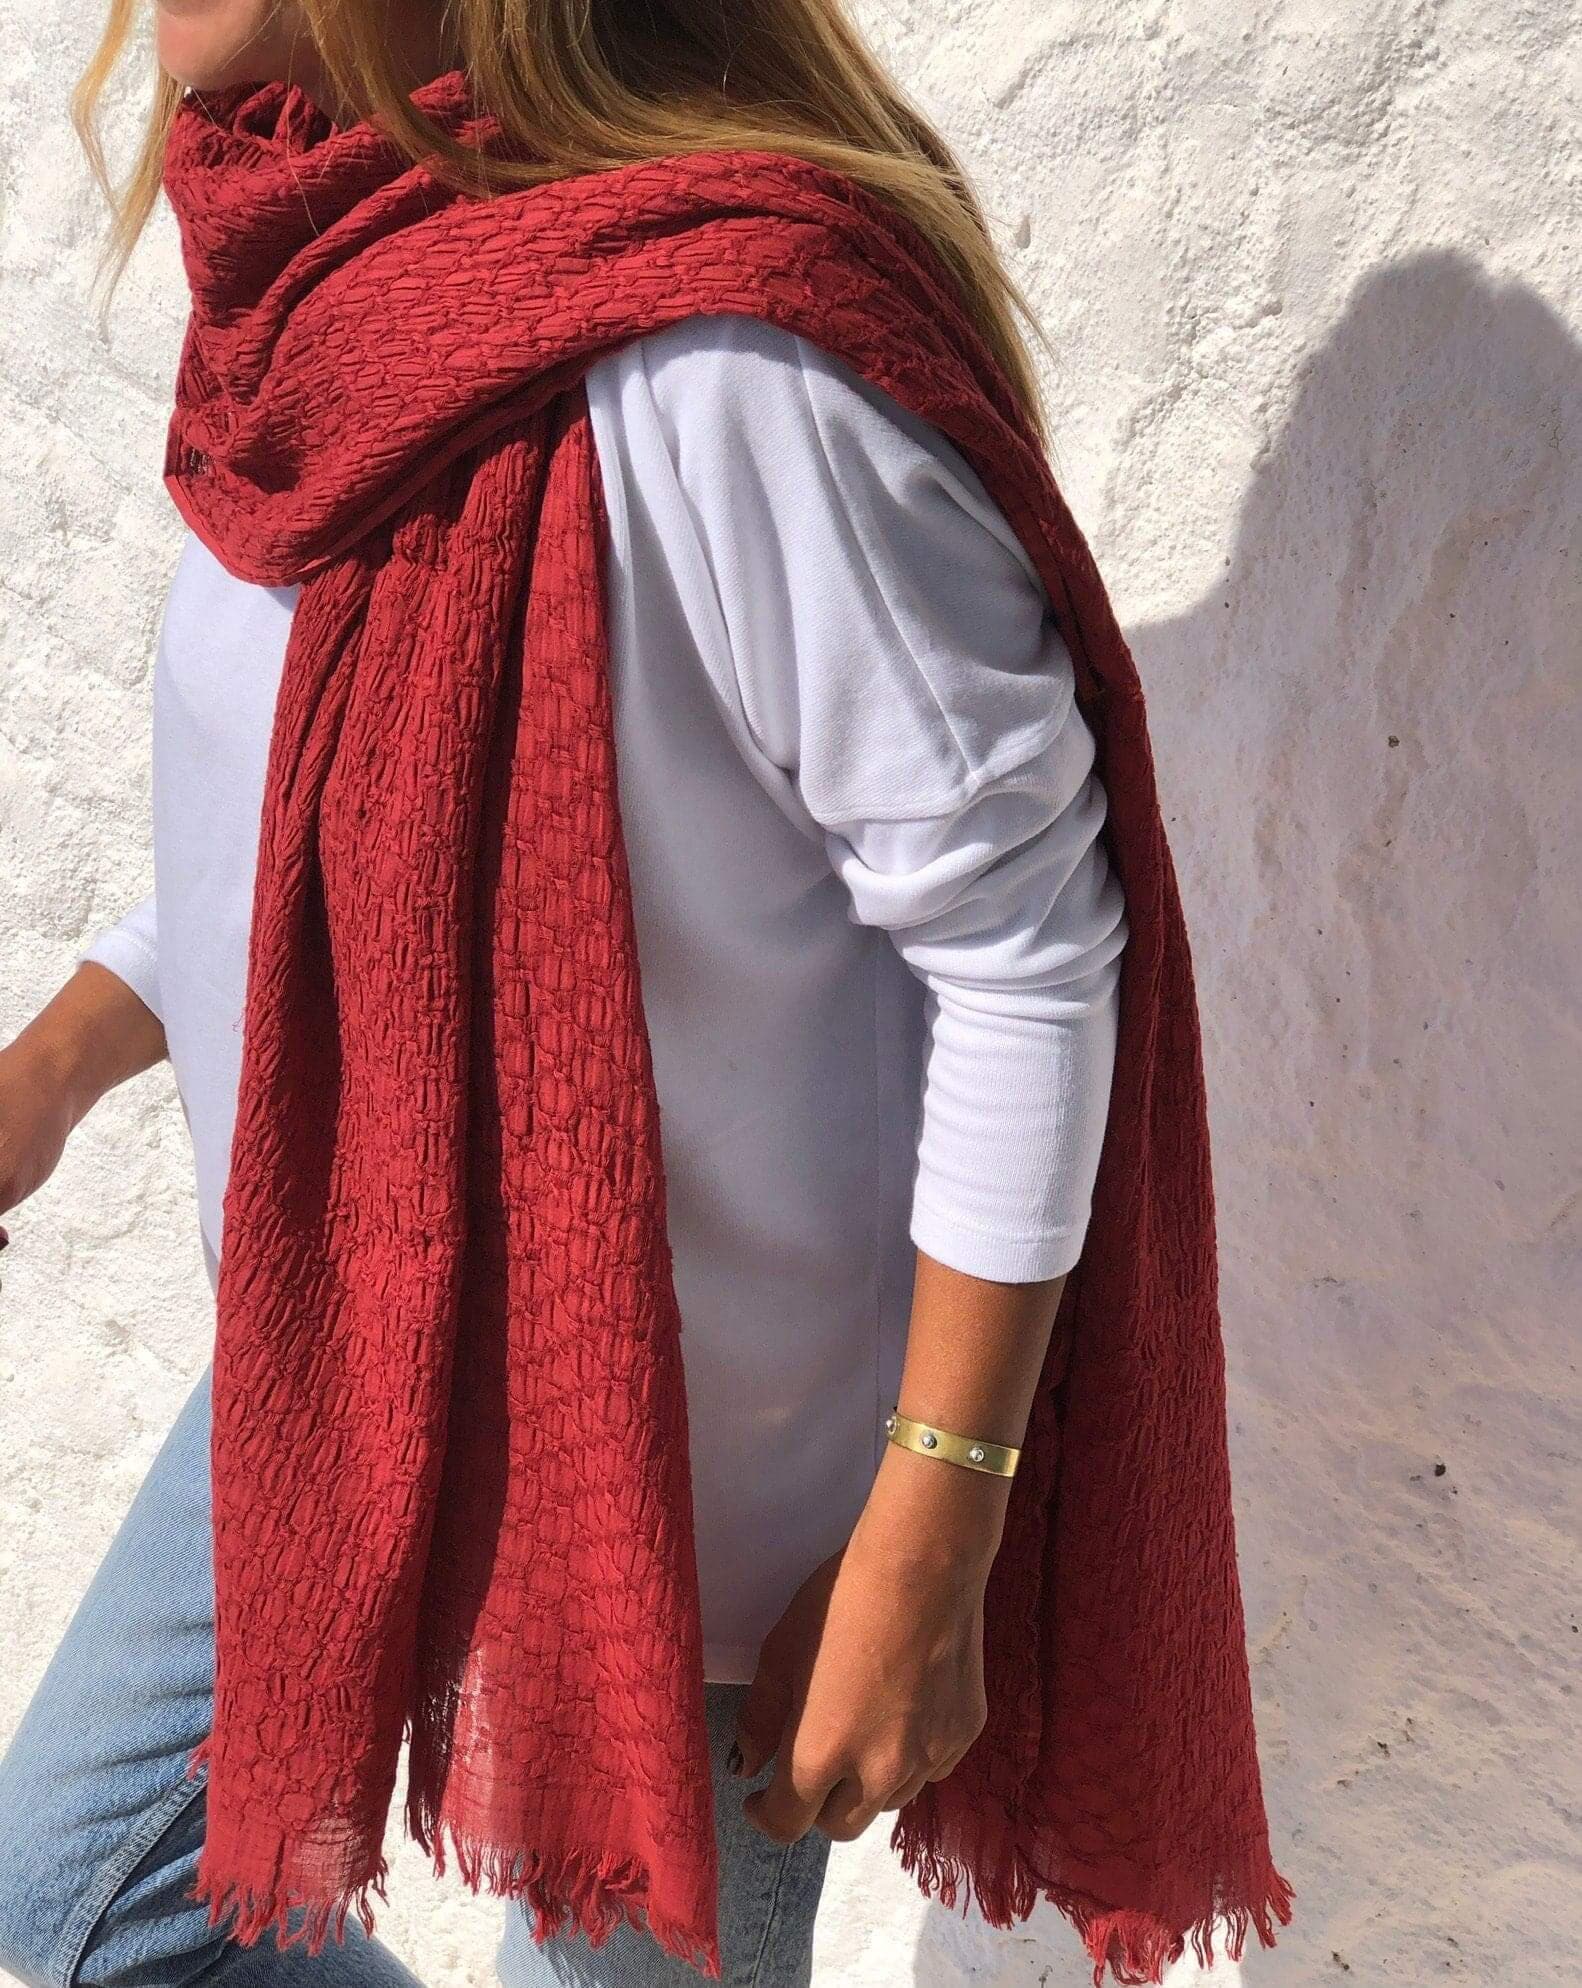 Recently, scarves have been worn by both men and women for protection purposes while adding a touch of elegance and beauty to their outfits. Middle Eastern women often wear a scarf as an accessory to keep warm